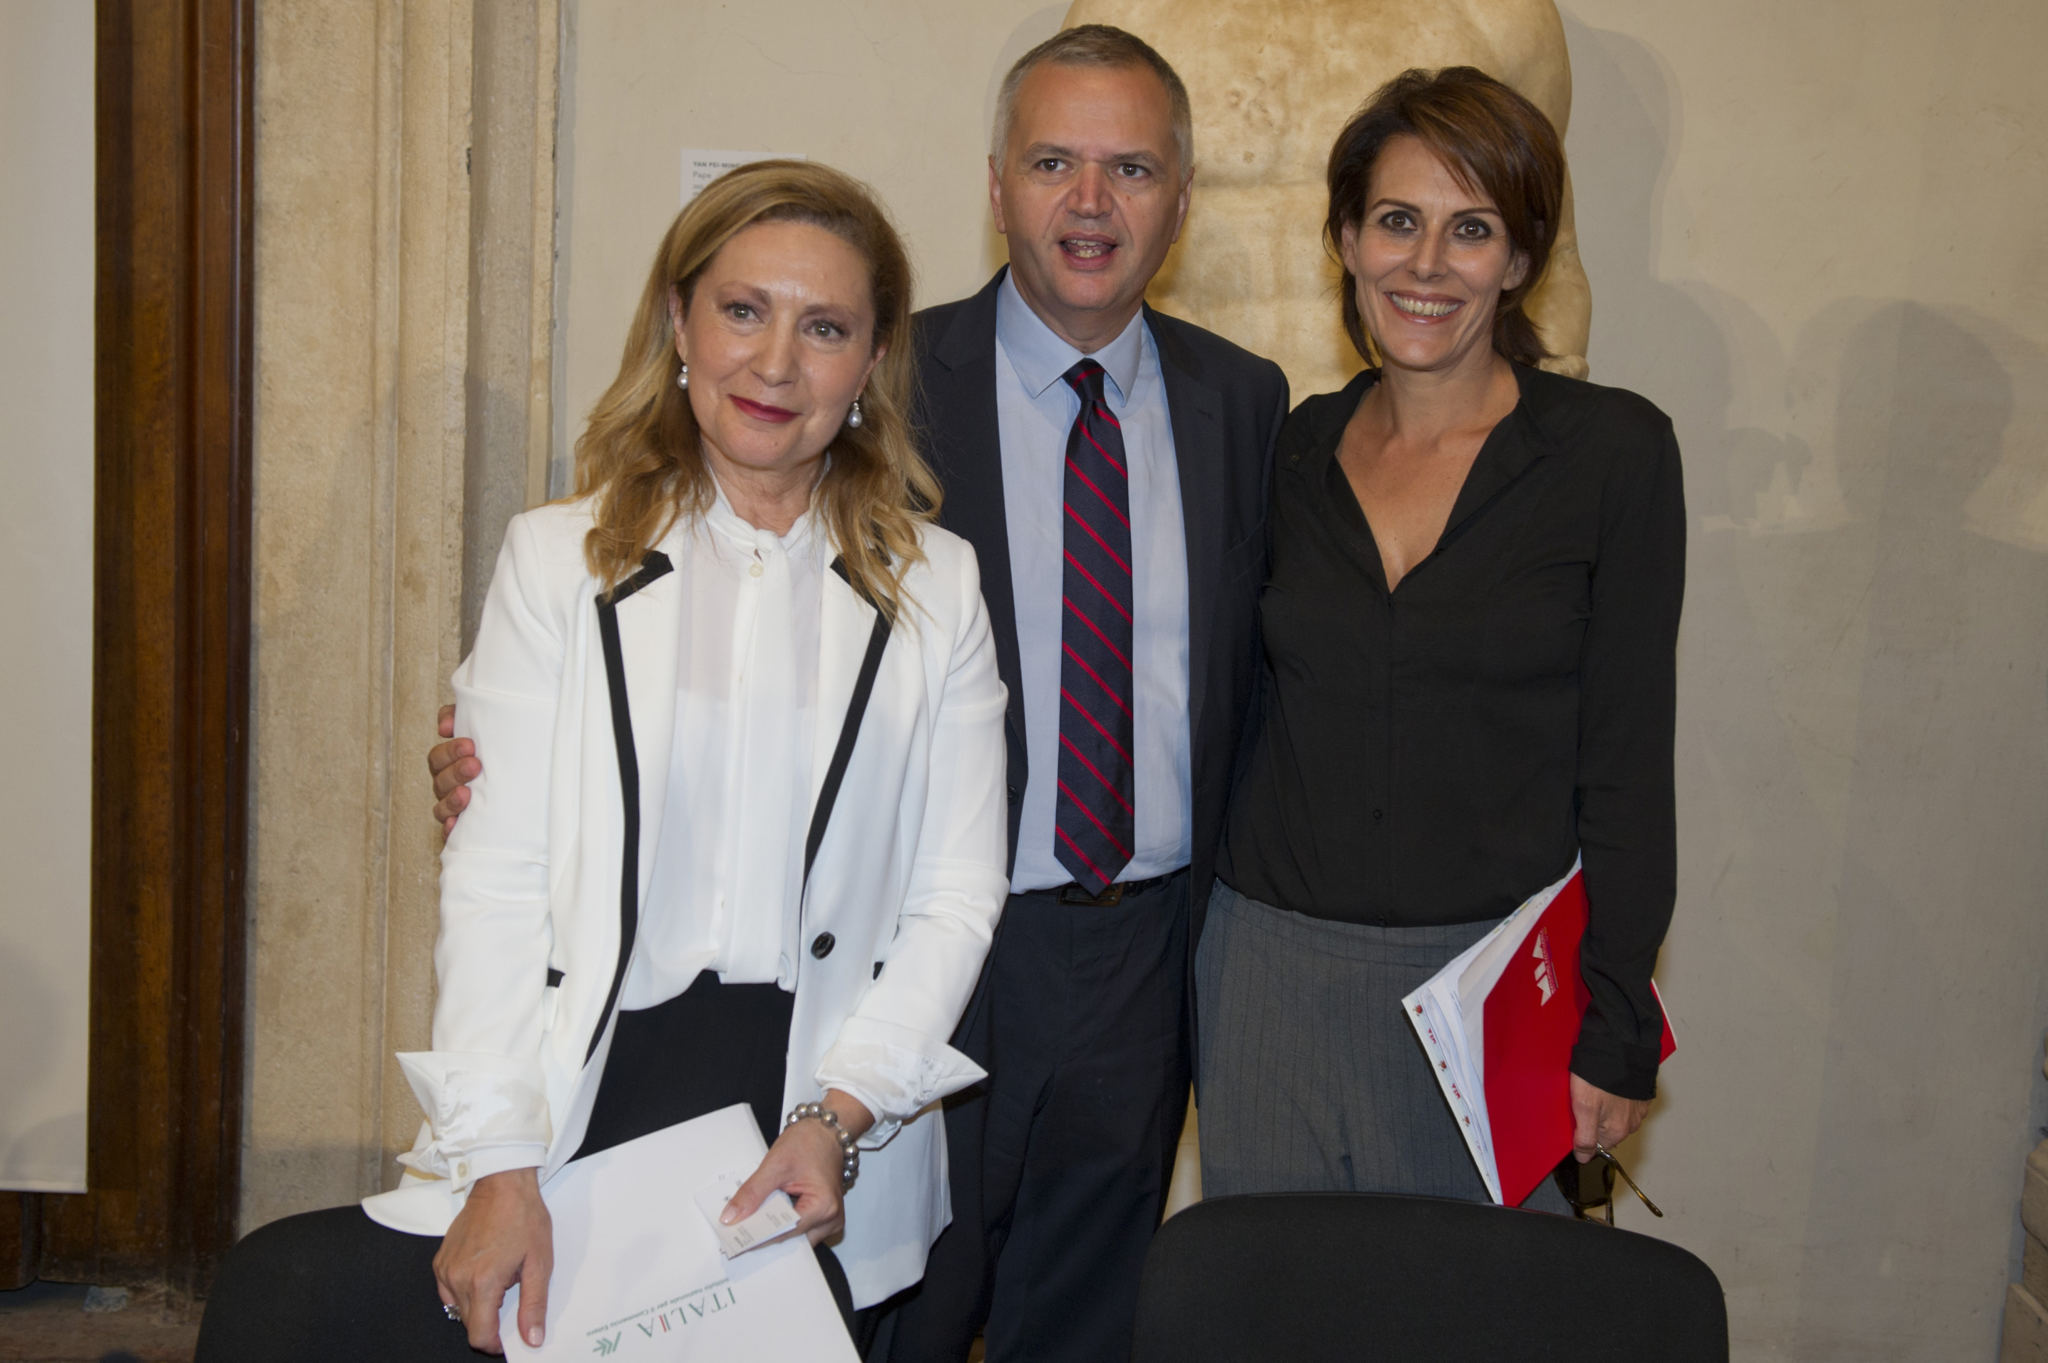 Maria Ines Aronadio (ICE Officer at the Coordination office for the Promotion of Made in Italy), Nicola Borrelli (MIBAC General Director for Cinema), Lucia Milazzotto (Executive Director)